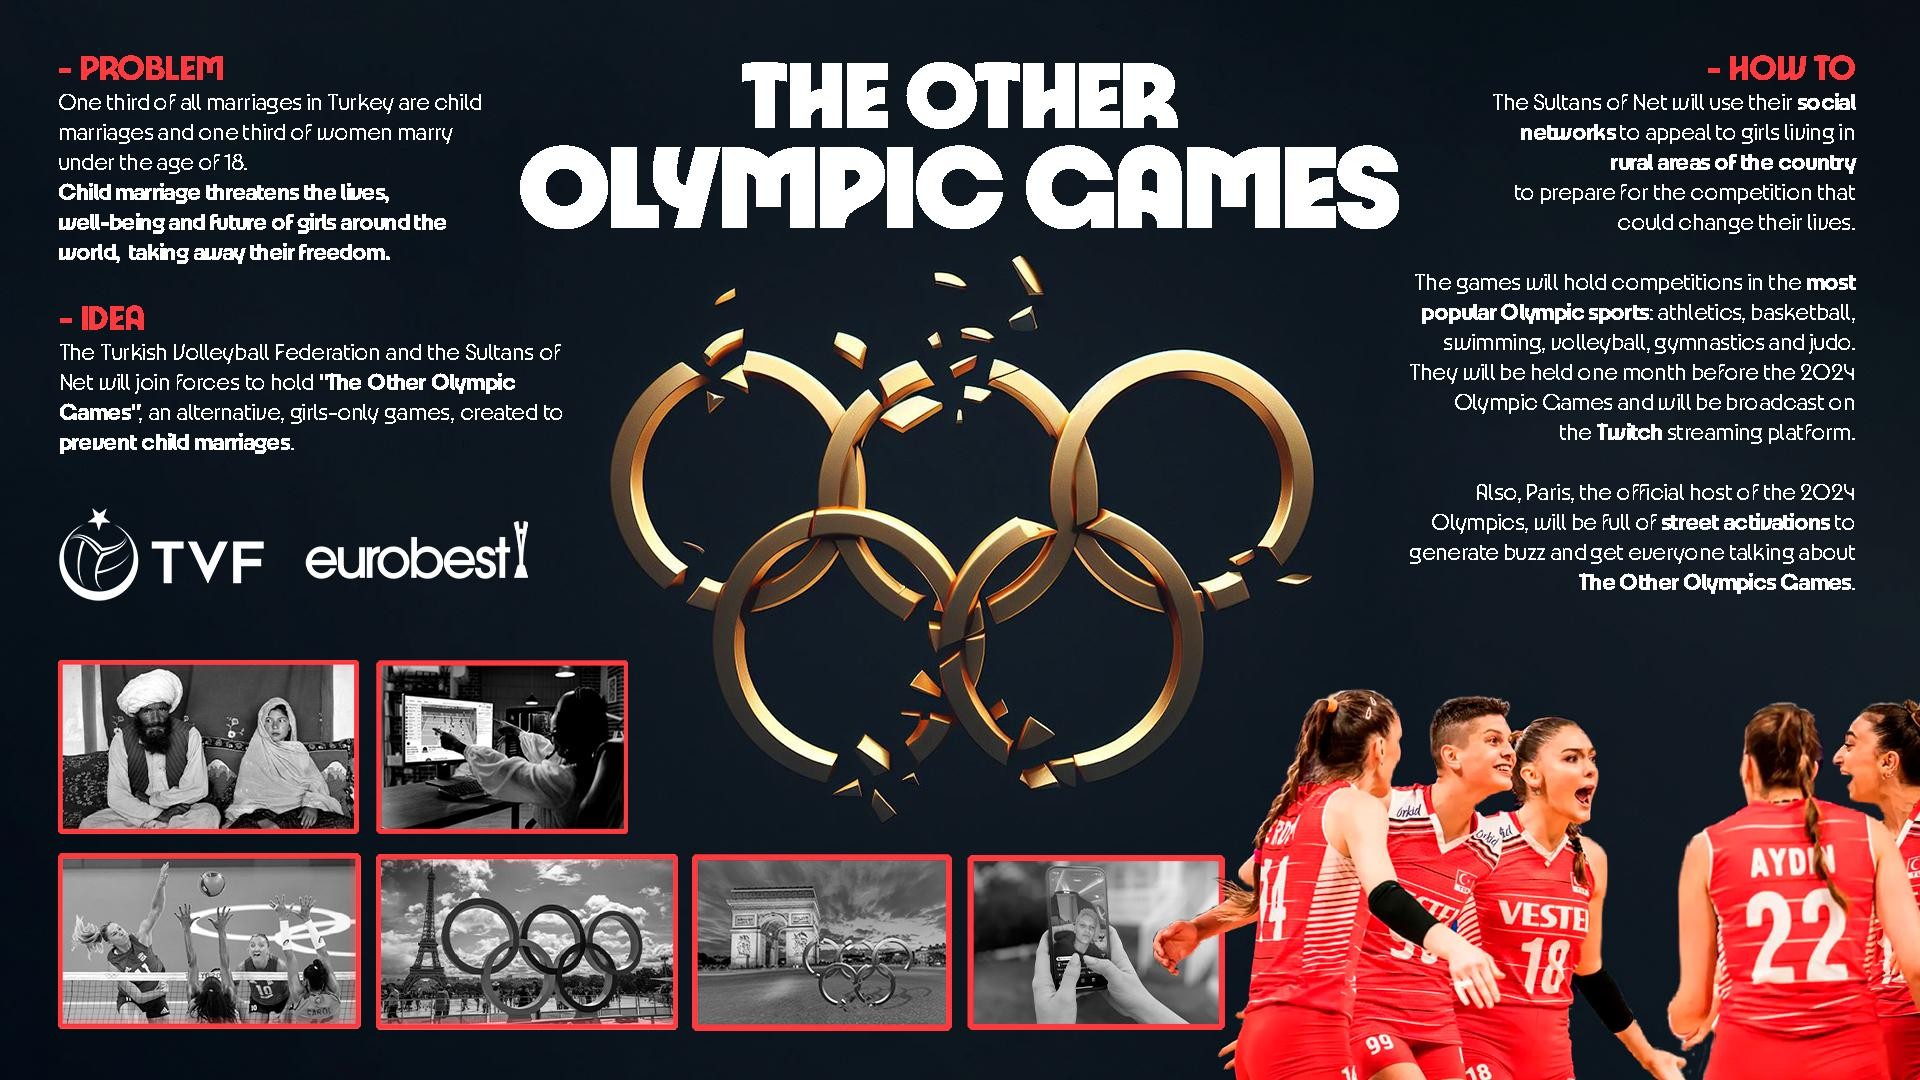 THE OTHER OLYMPIC GAMES